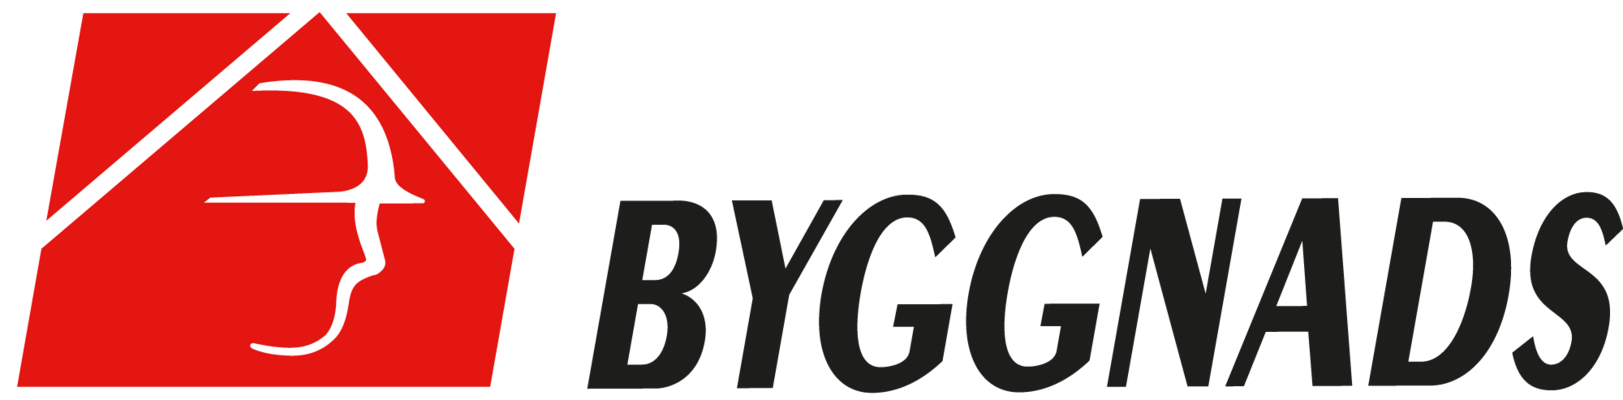 Profile image for Byggnads